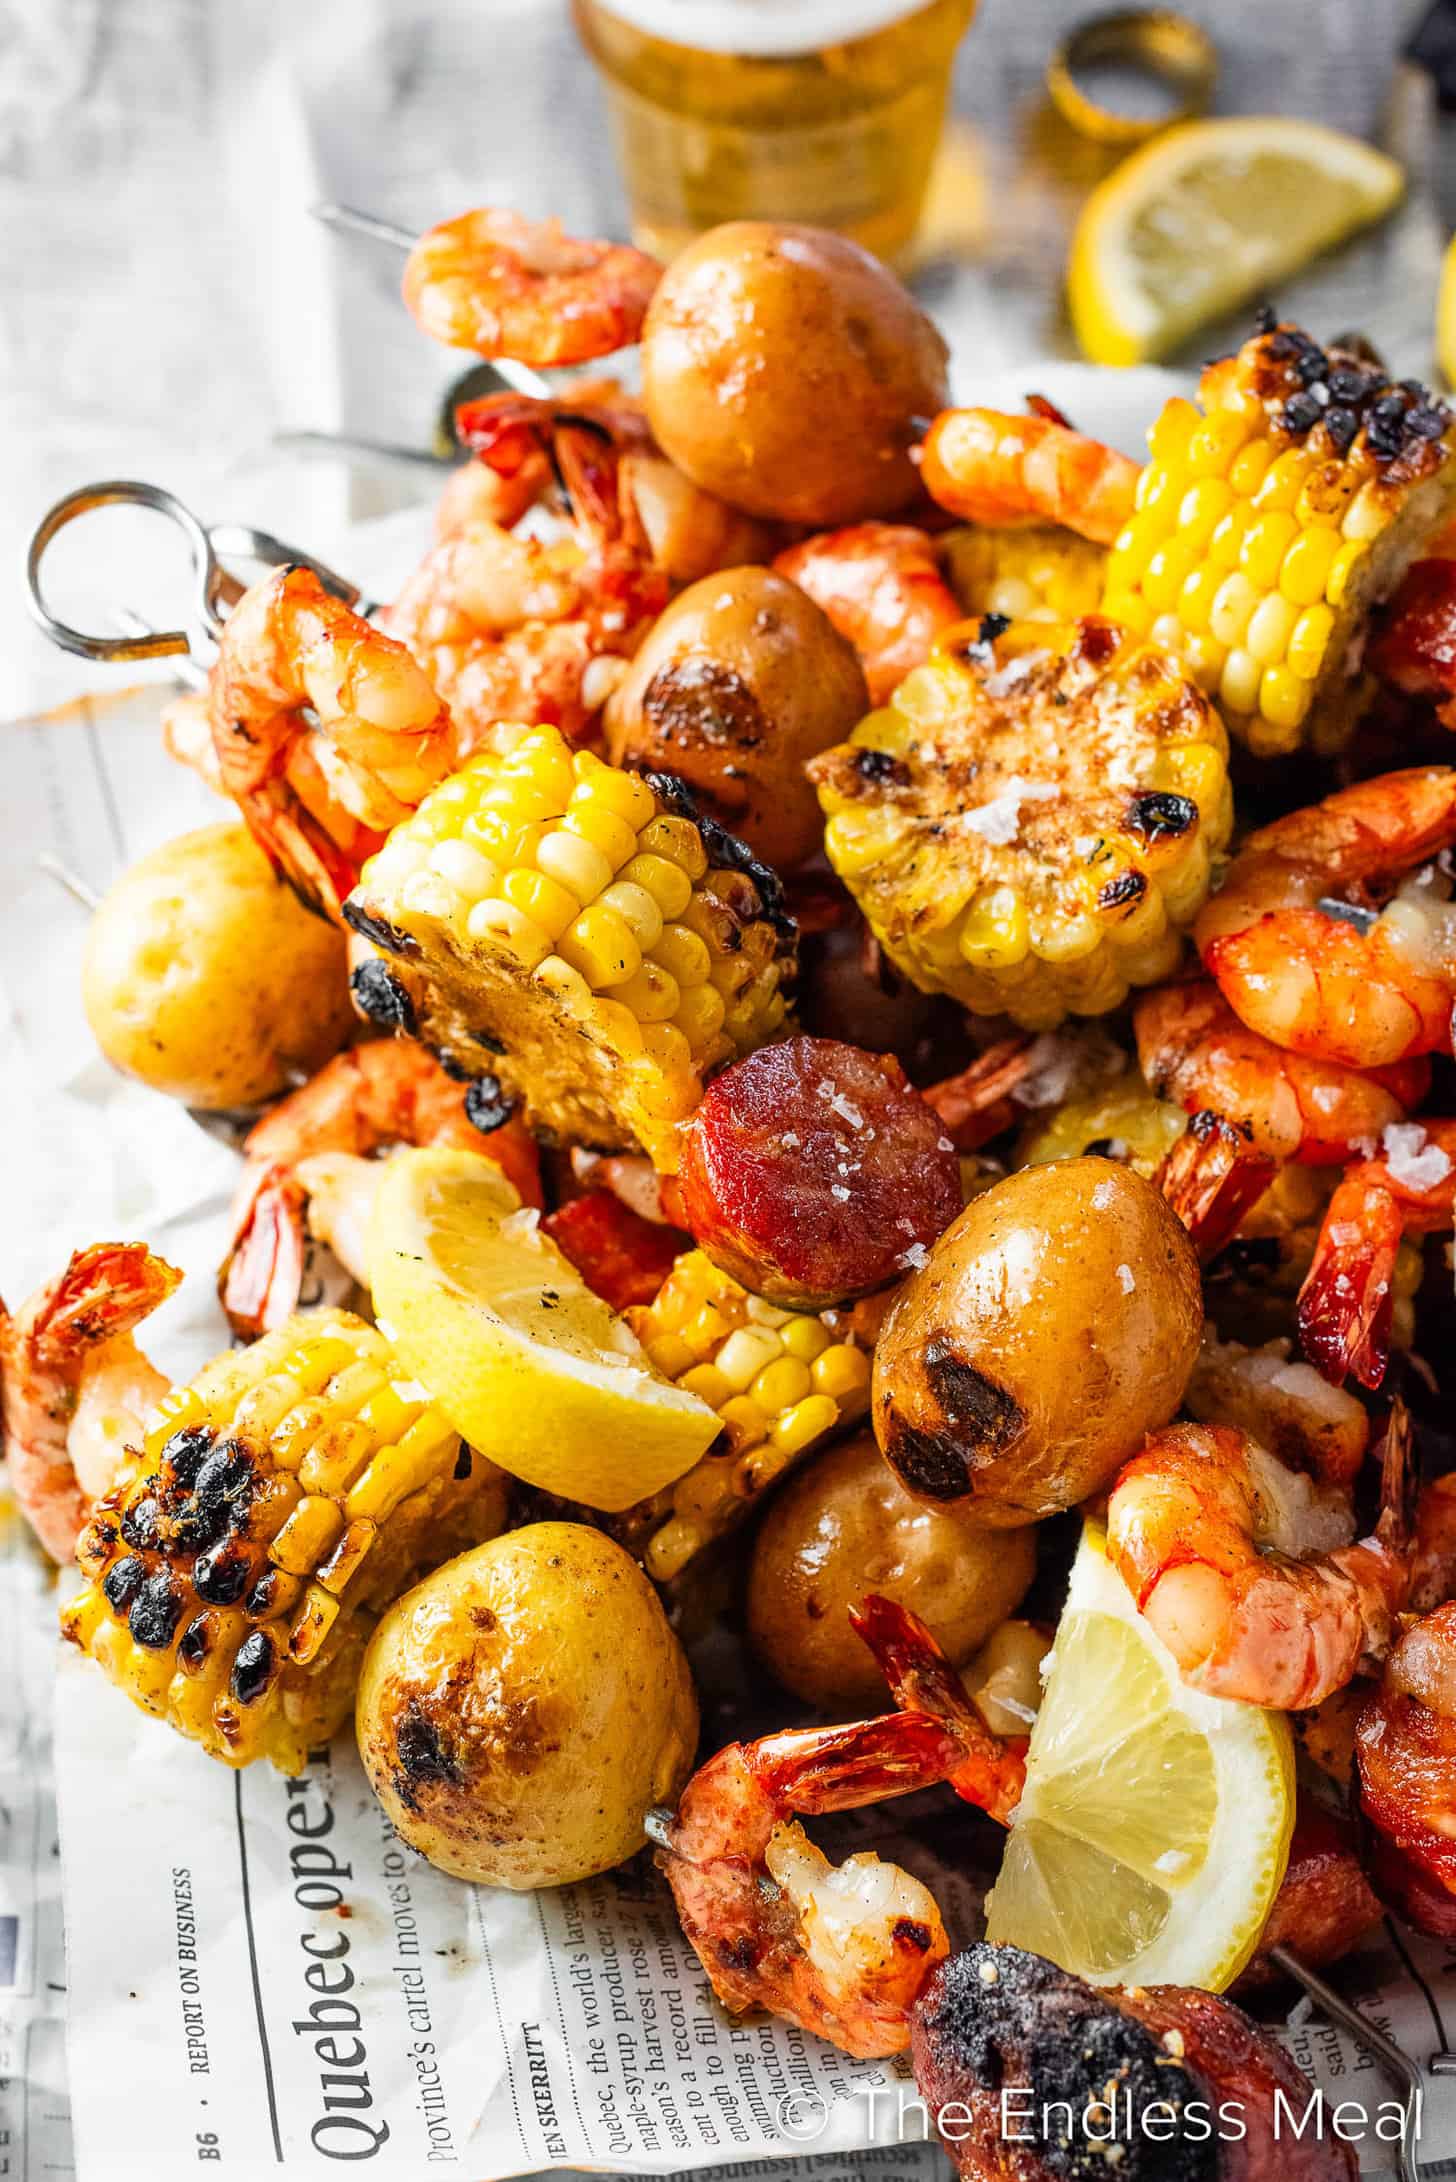 Shrimp Boil Skewers with Cajun seasoning on a serving tray